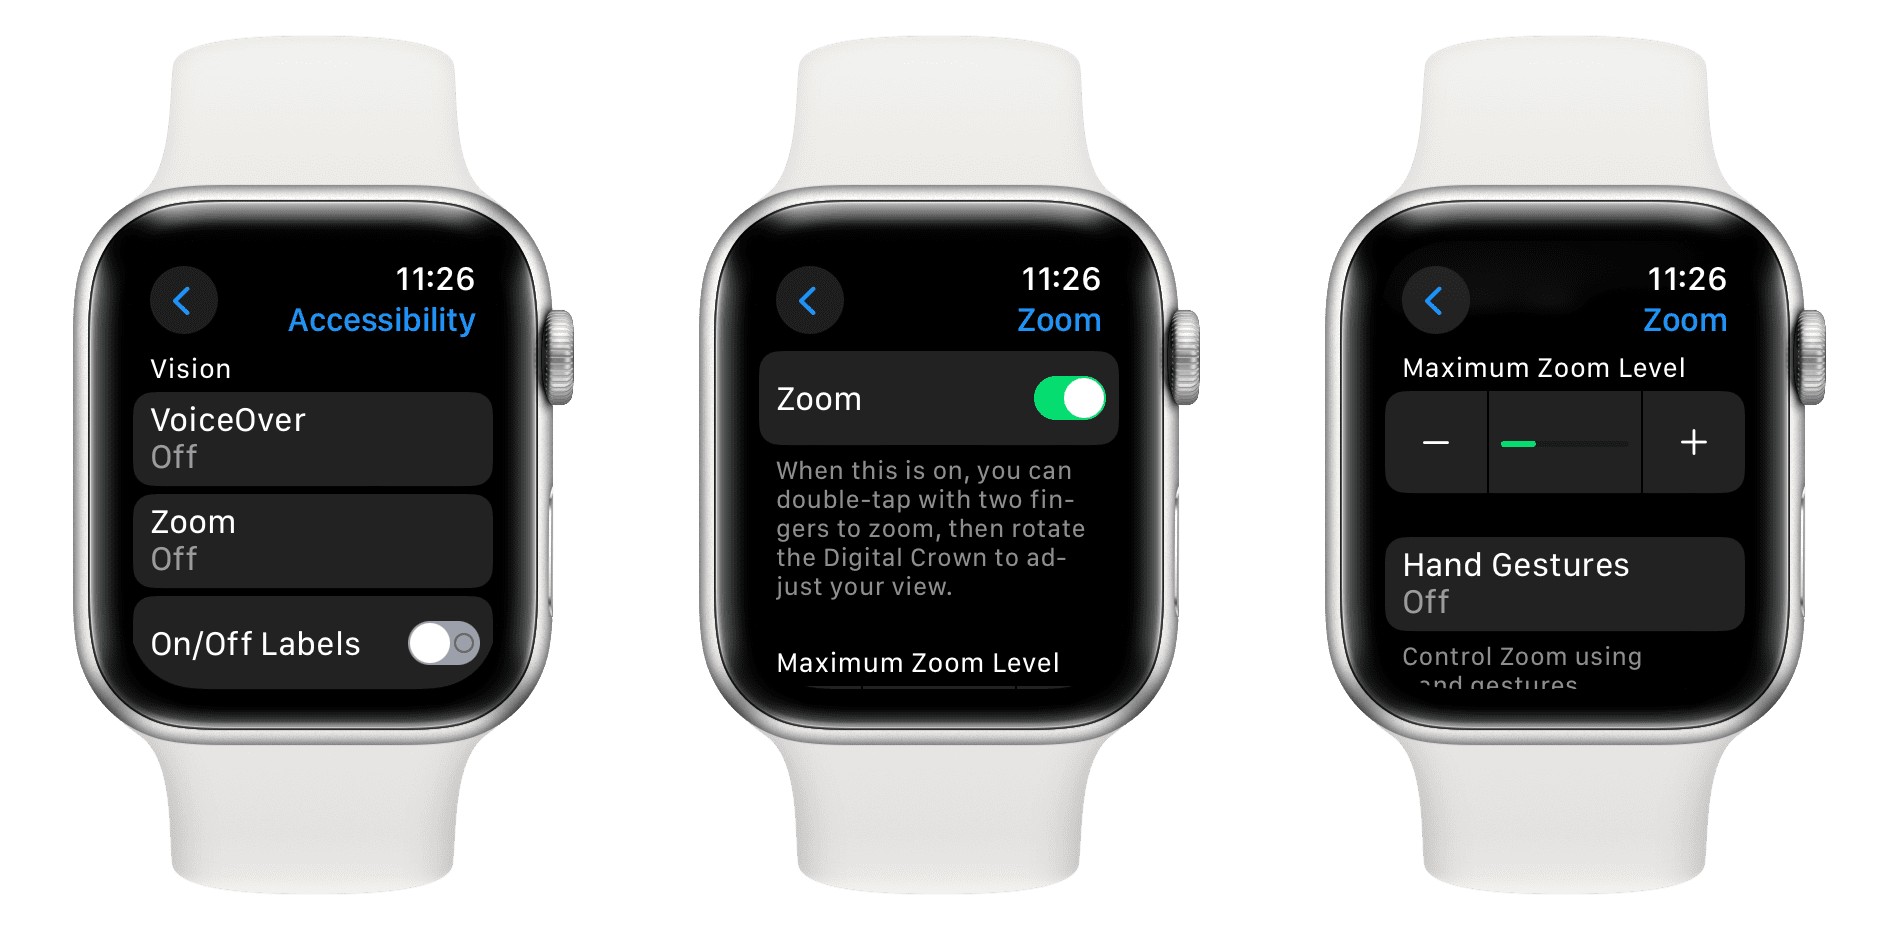 Turn on Zoom accessibility settings on Apple Watch